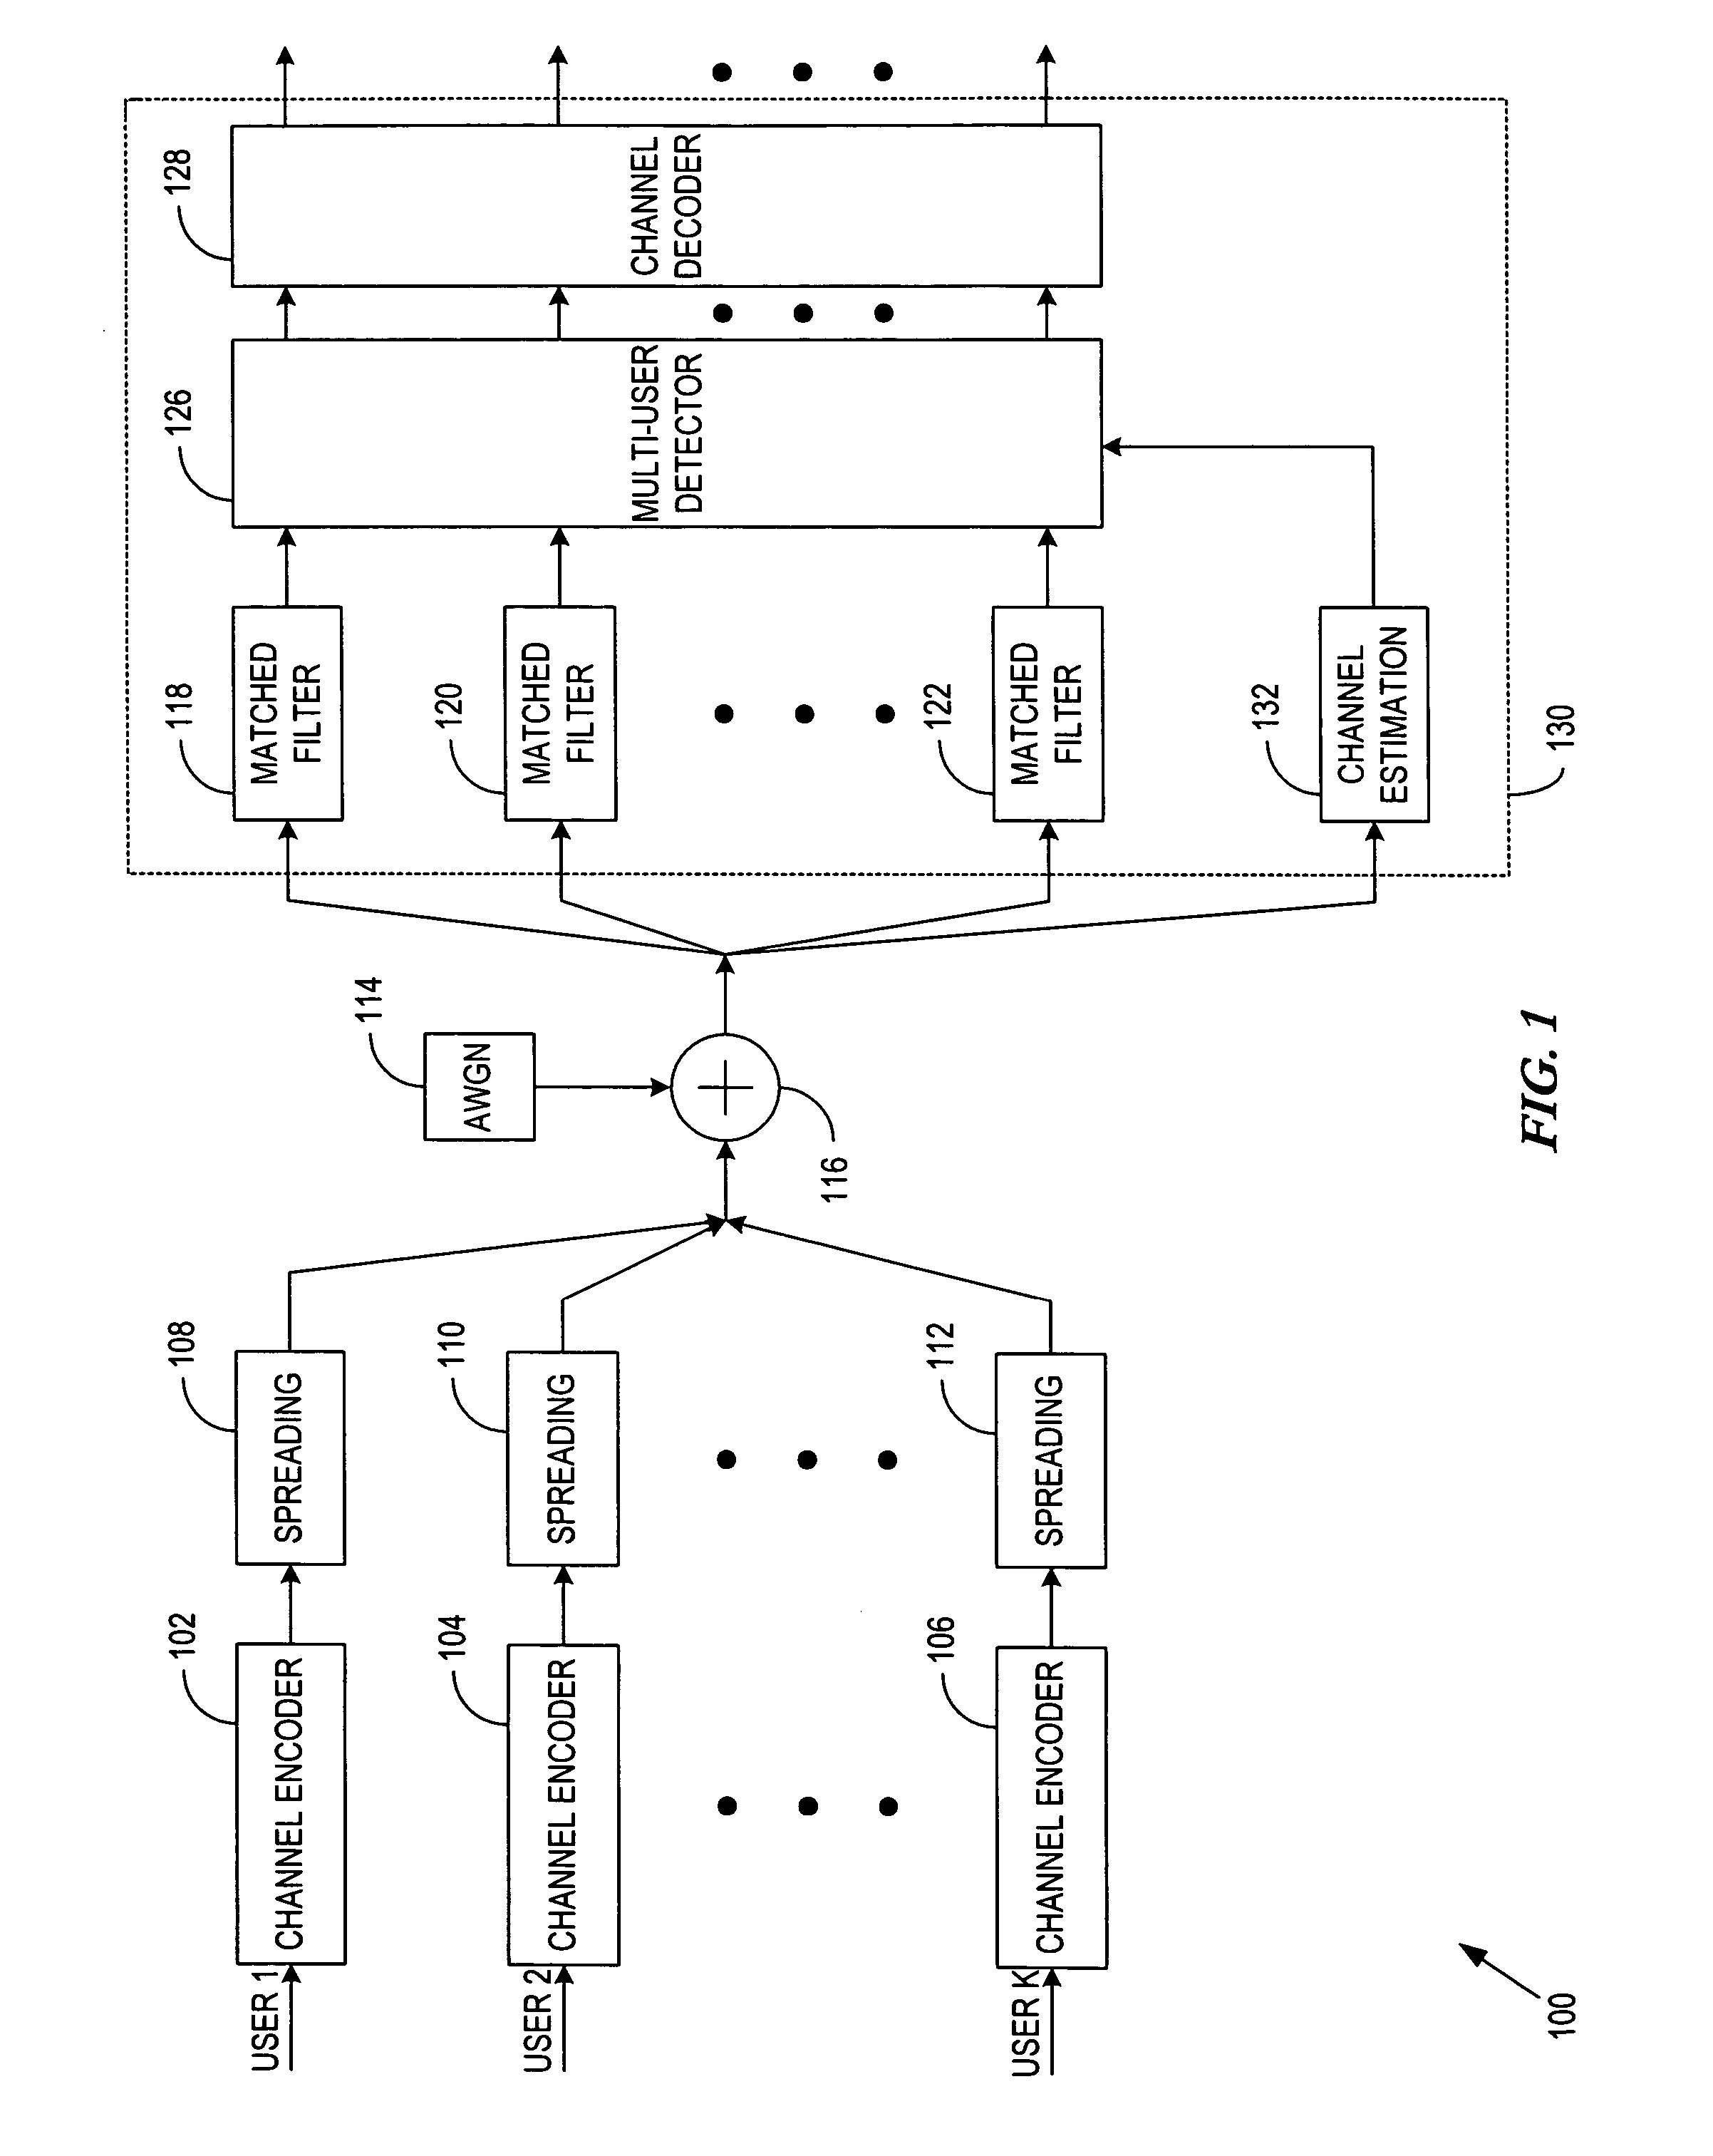 System, apparatus, and method for adaptive weighted interference cancellation using parallel residue compensation